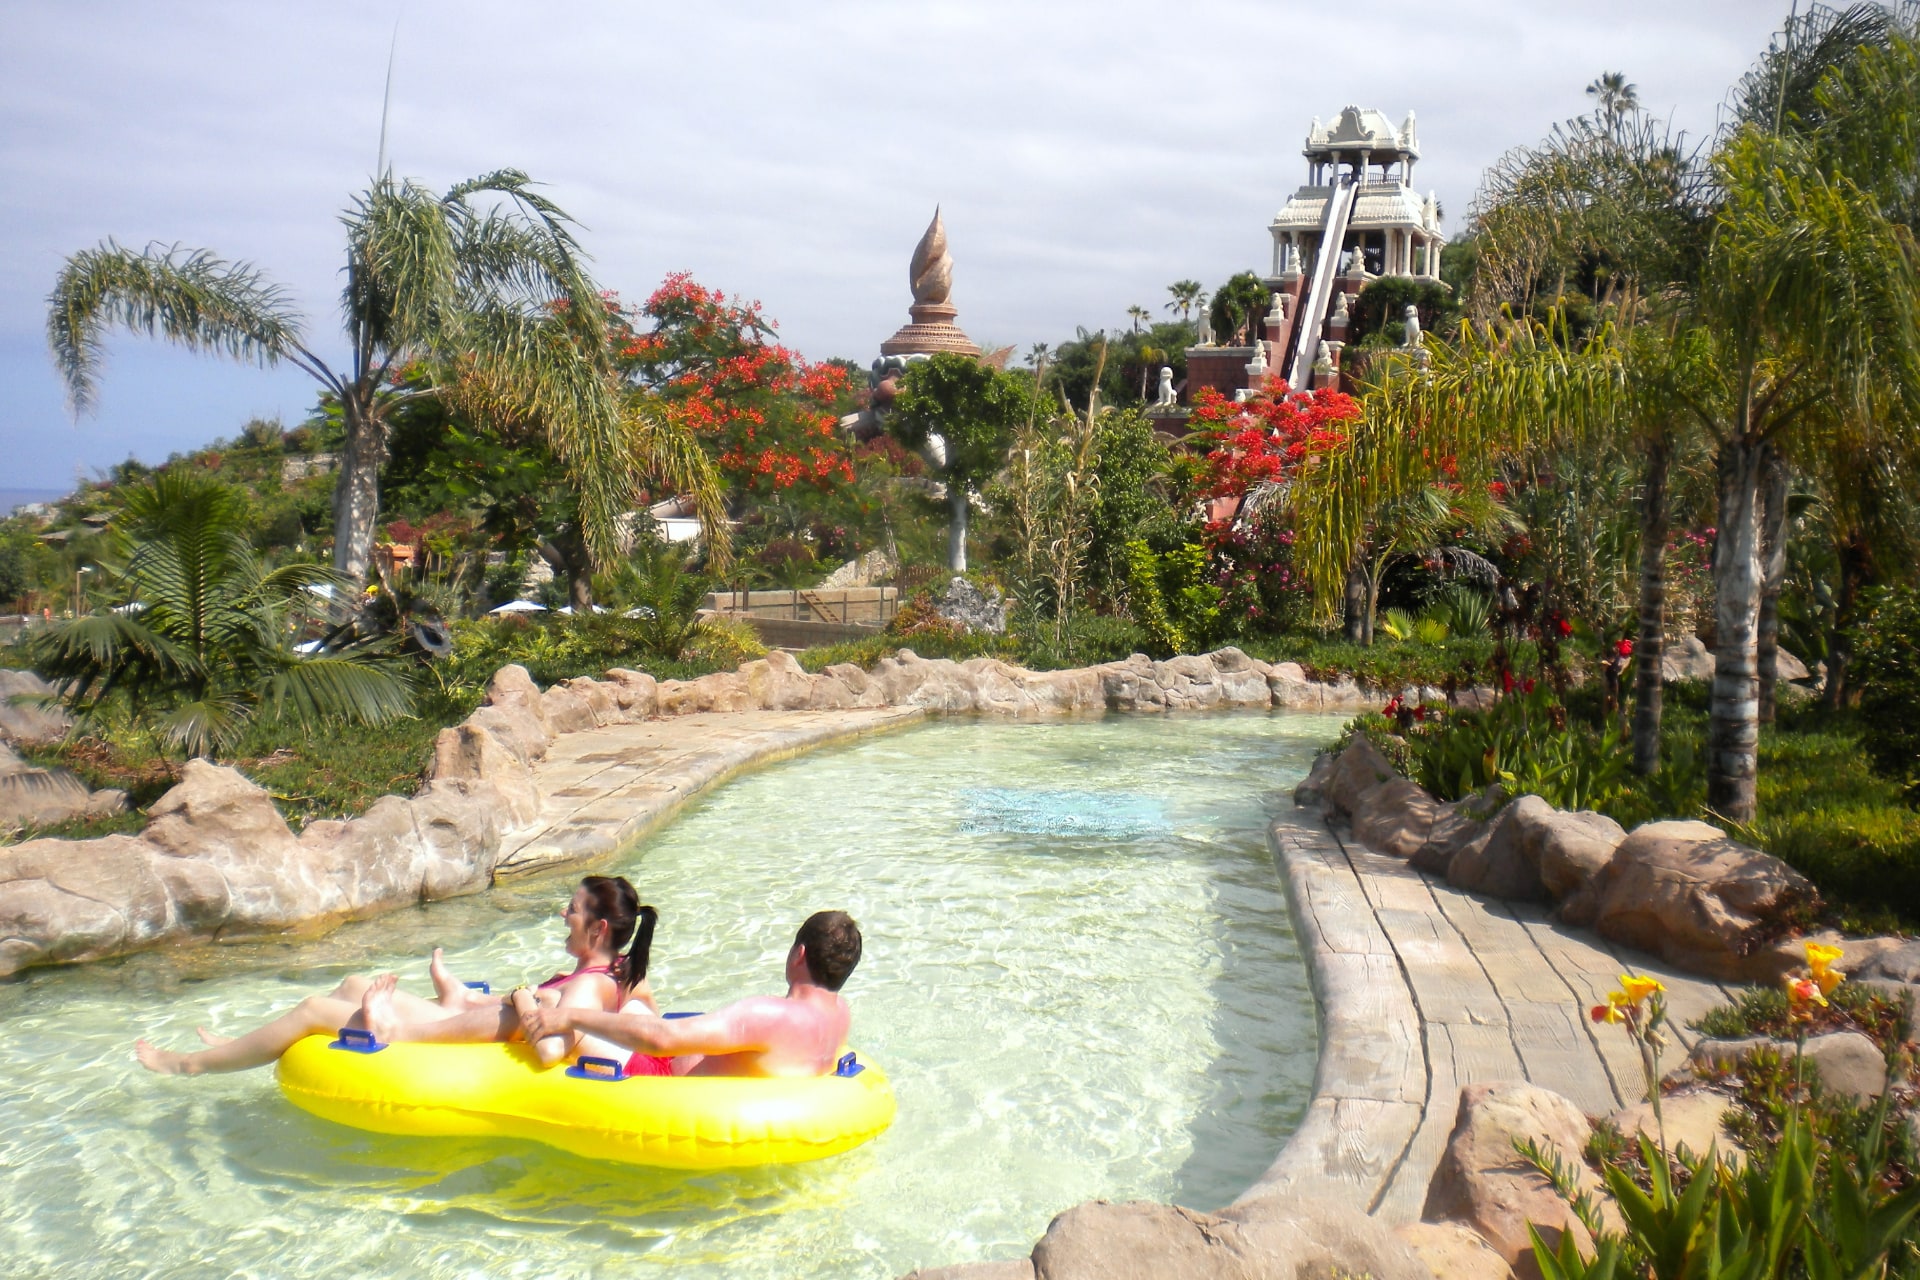 The Tower of Power overlooking the lazy river at Siam Park, Tenerife, adding excitement to the water ride experience